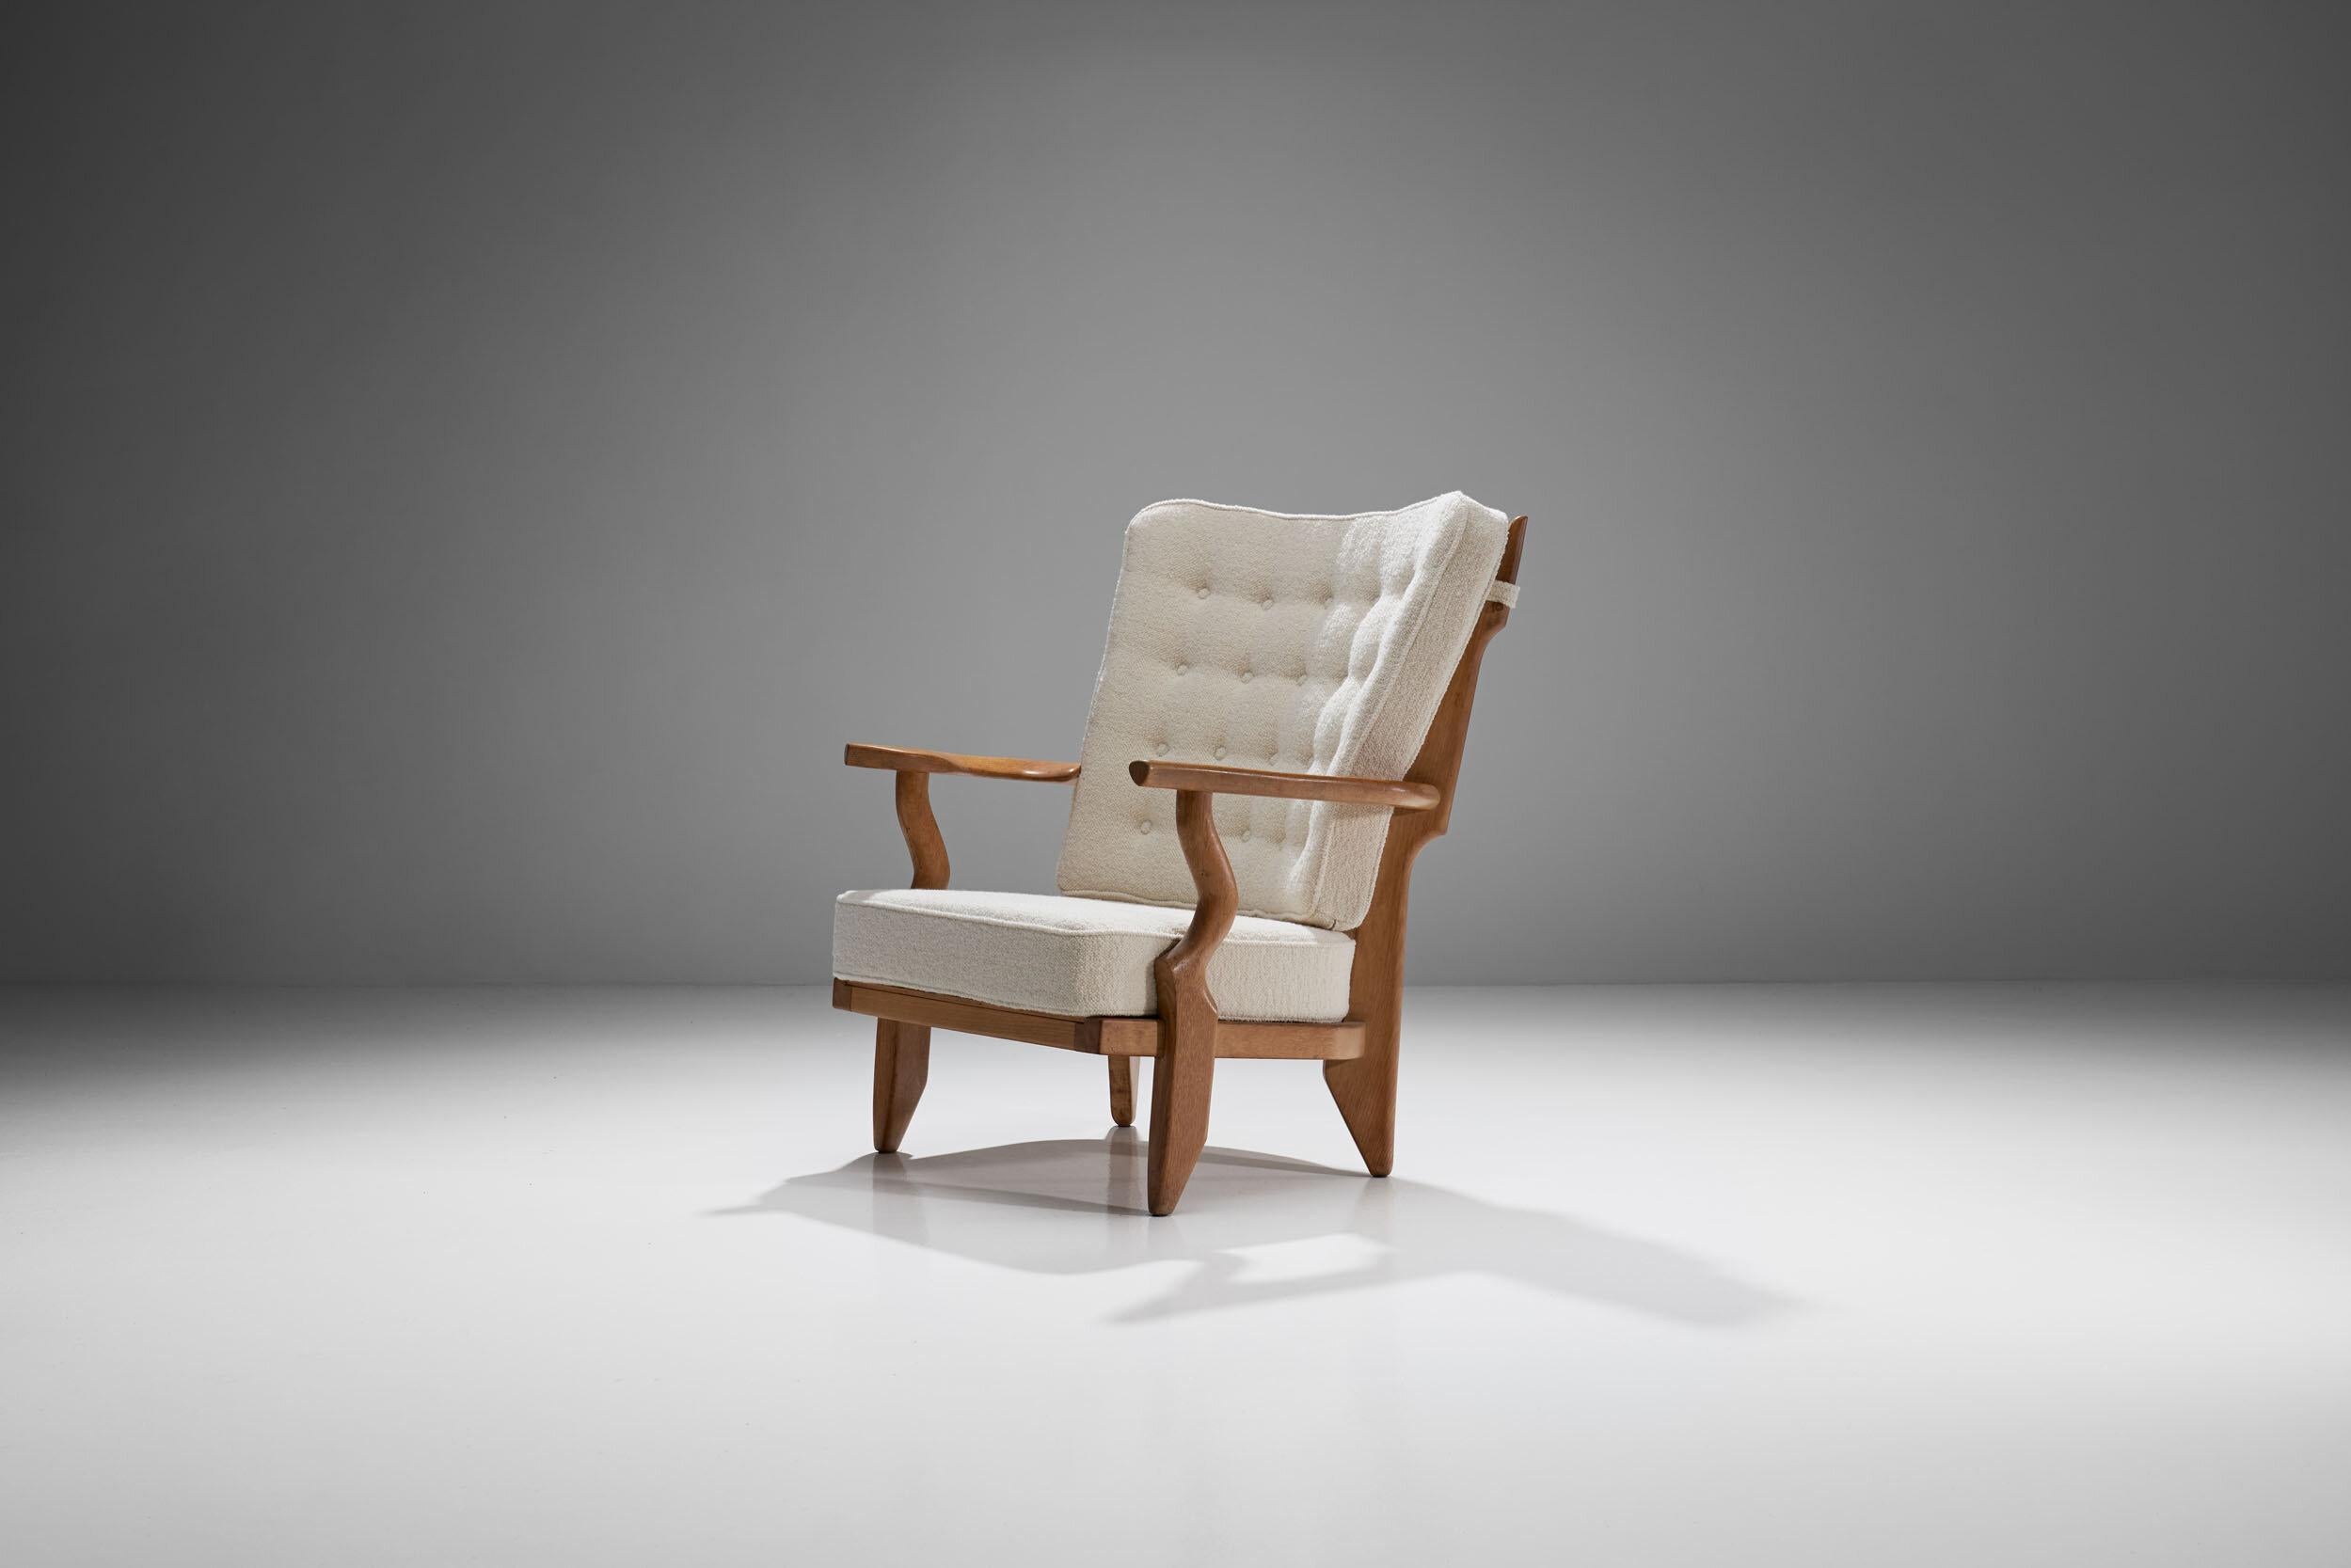 Guillerme et Chambron “Petit Repos” lounge chair, France, 1950s

The Guillerme et Chambron Petit Repos lounge chair displays a beautiful contrast between the light wooden oak frame and the elegant light fabric of the cushions. With a solid wooden